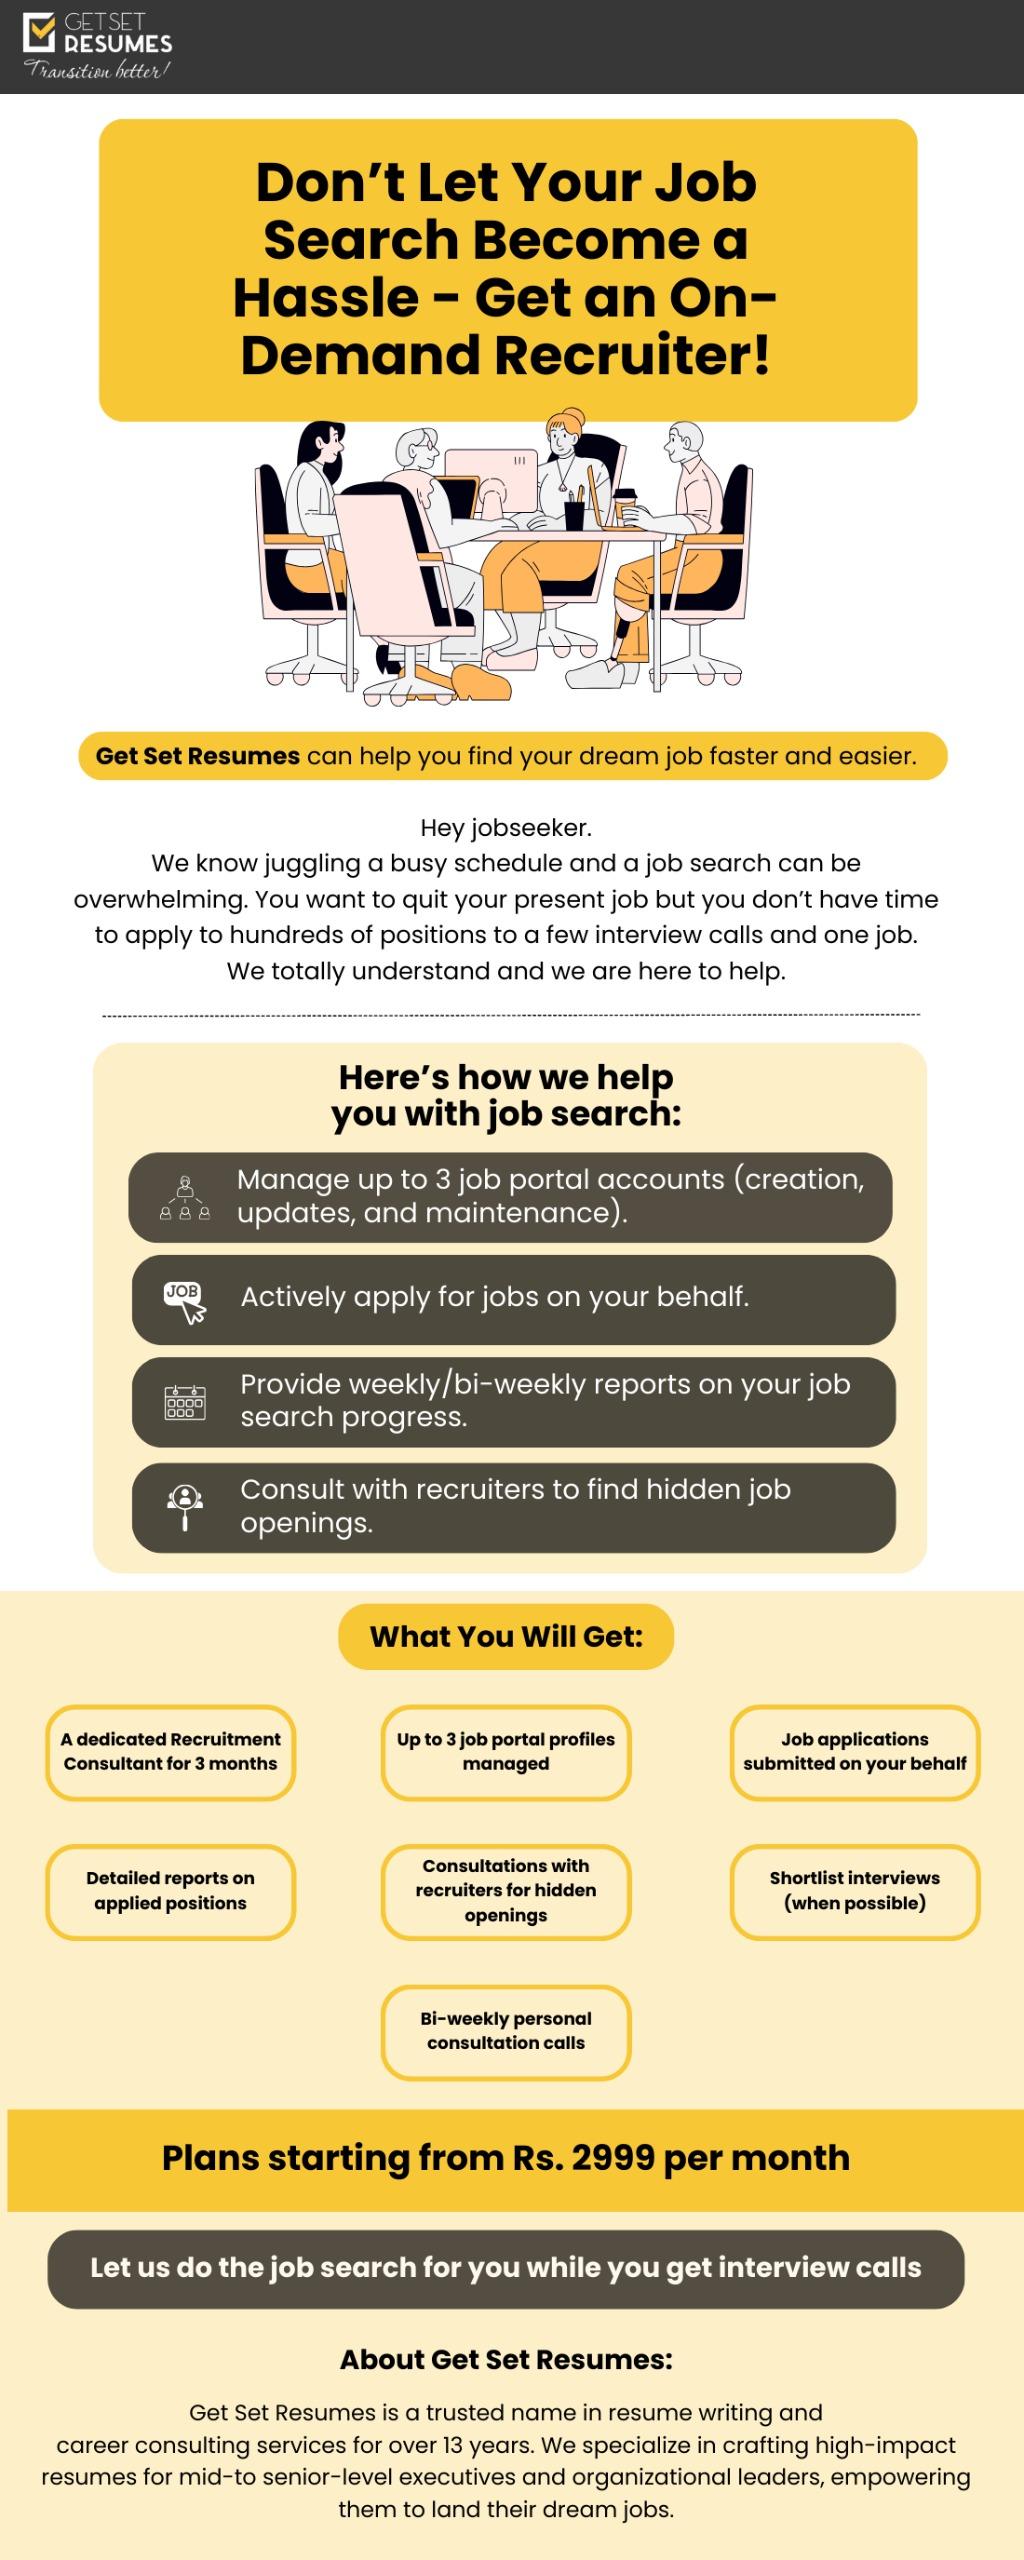 How to find a job in India. Take help from our job search assistance service.